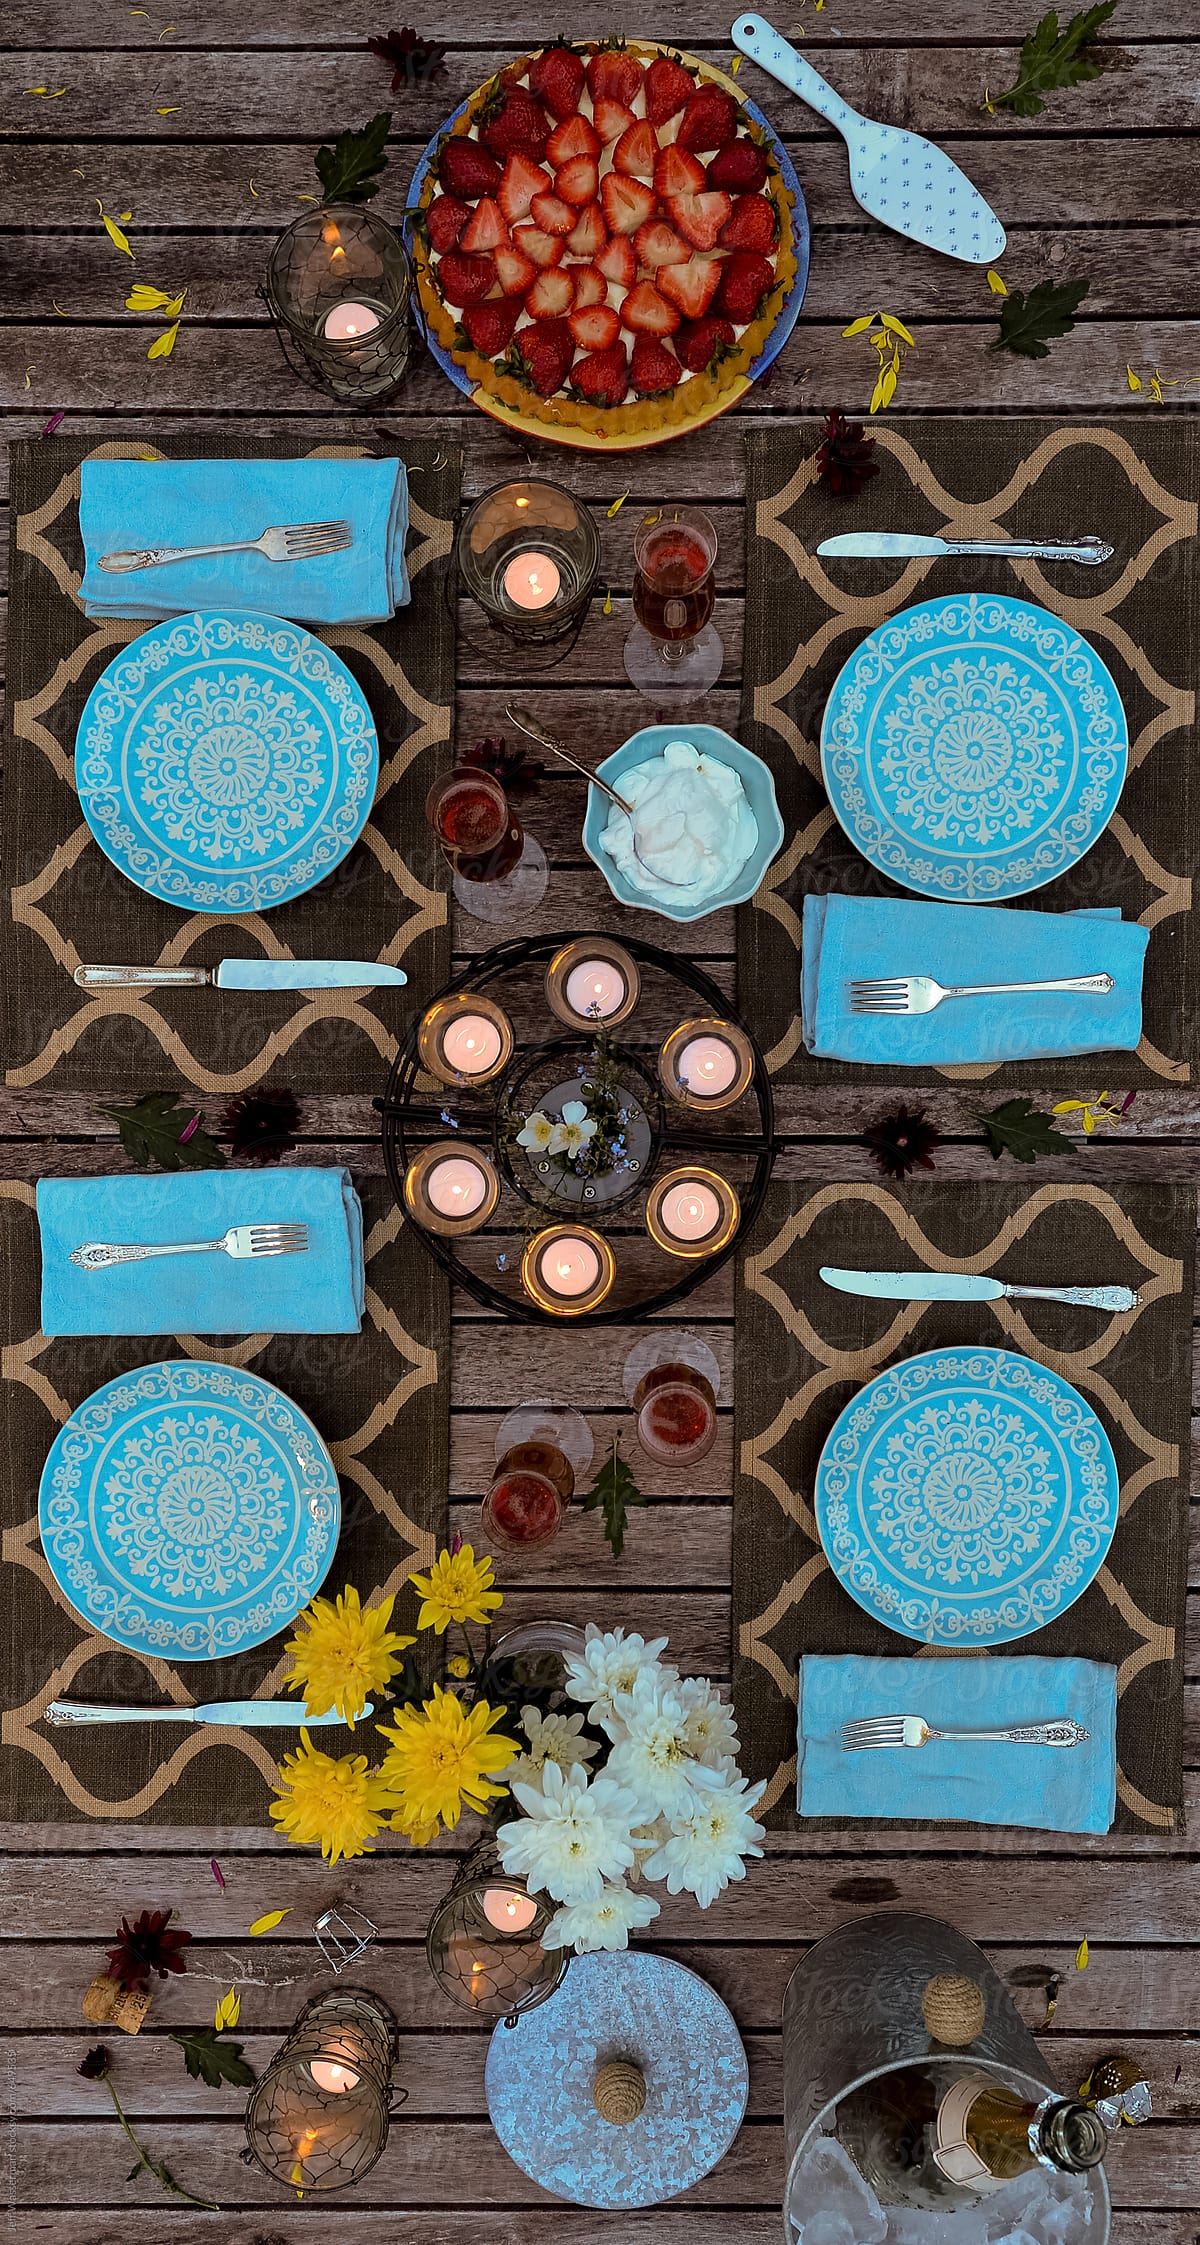 Place Settings Overhead at  Garden Dinner Party